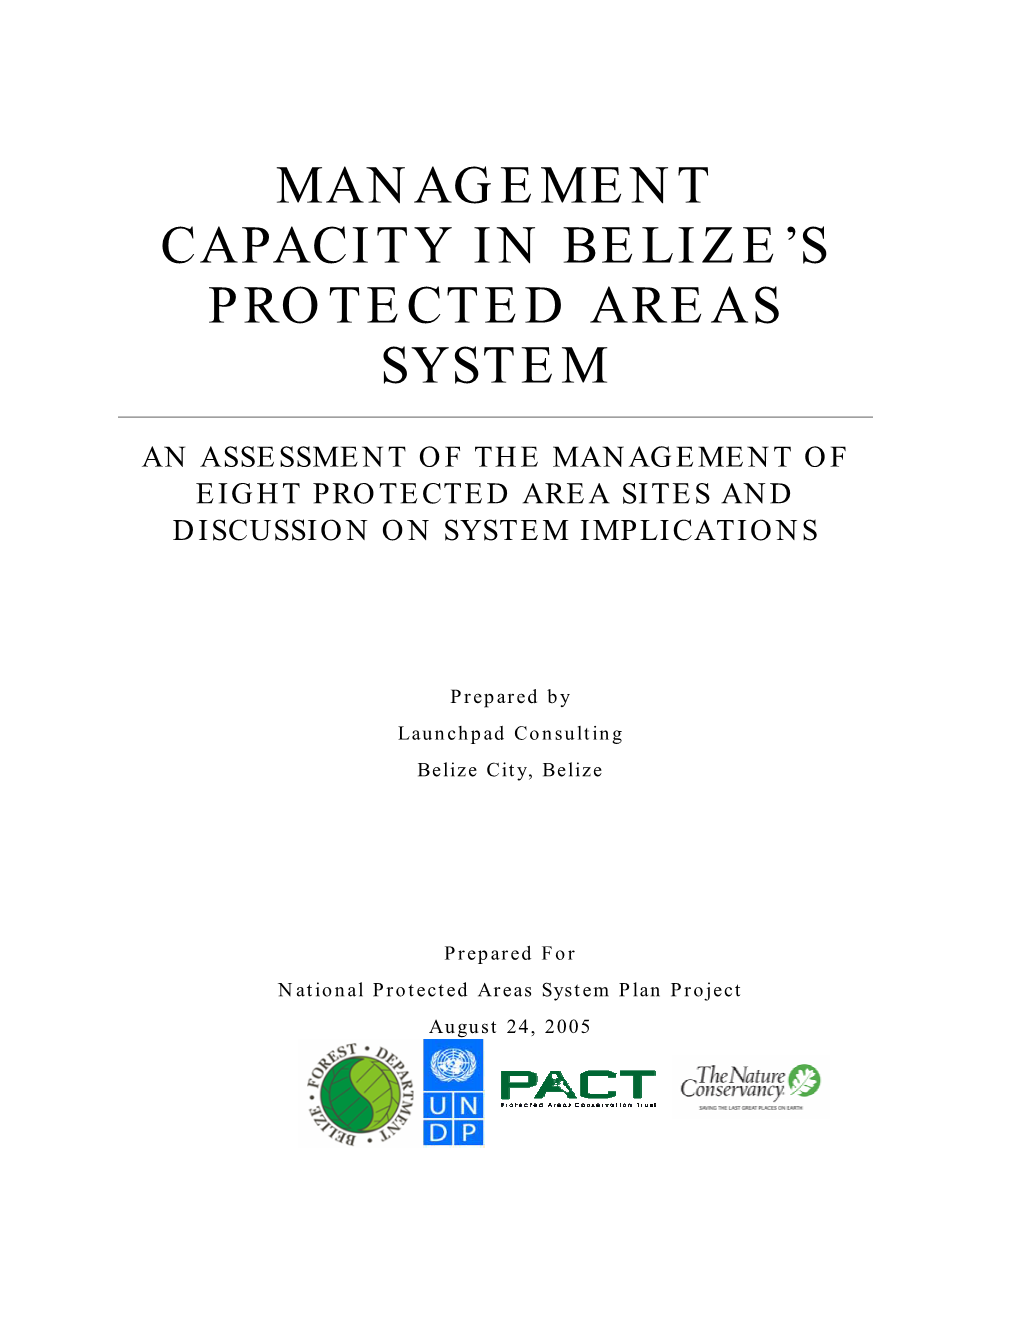 Management Capacity in Belize's Protected Areas